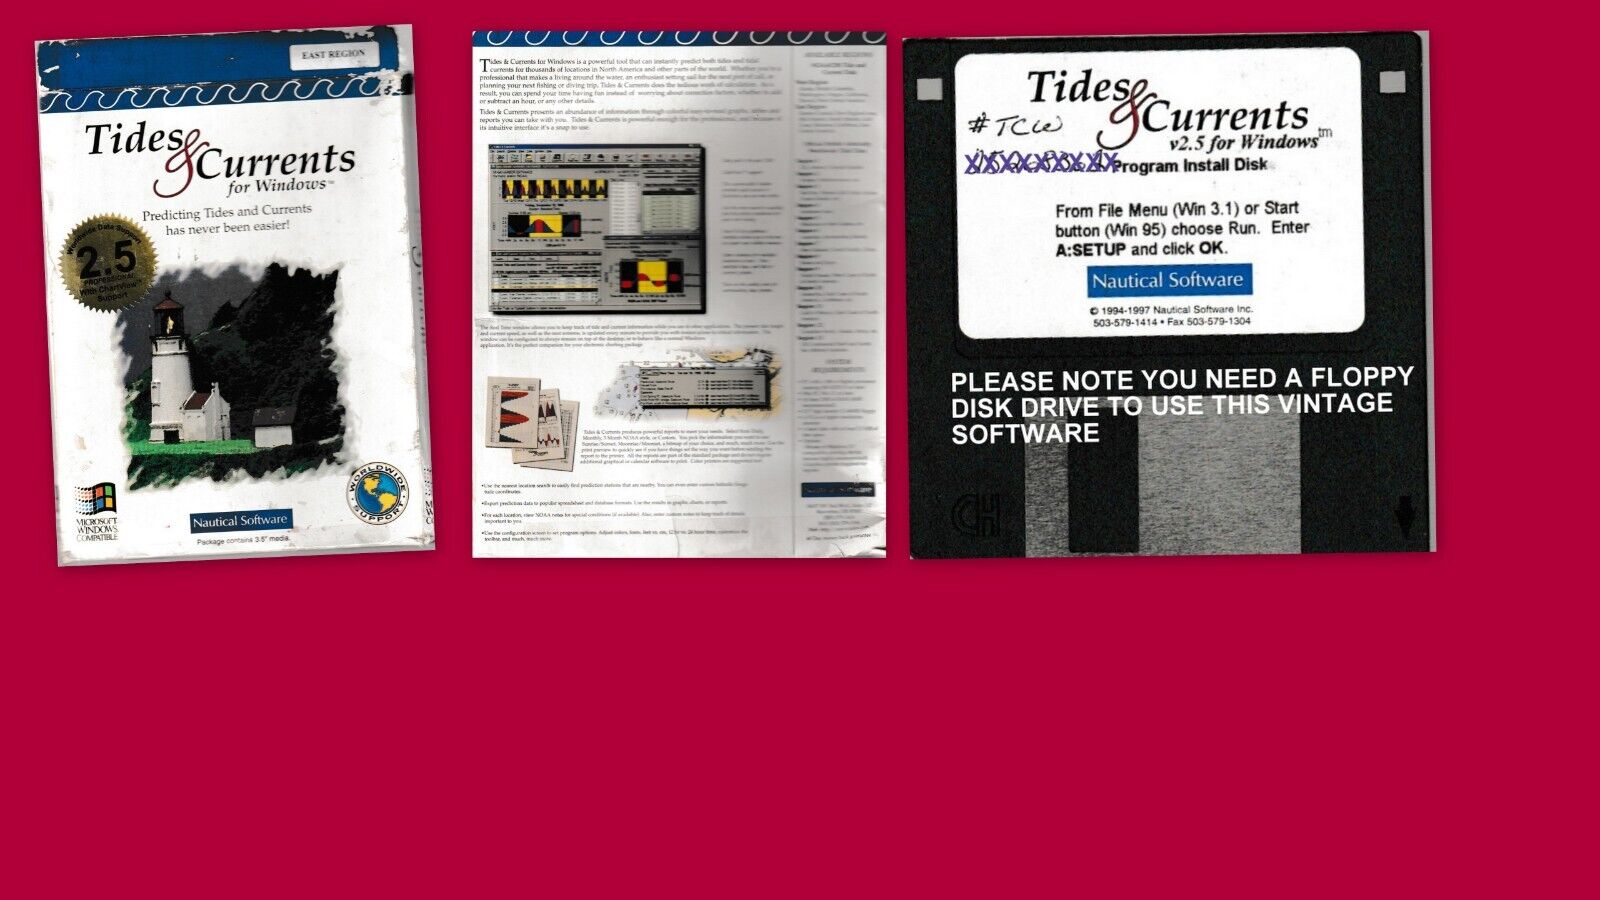 VINTAGE SOFTWARE & BOOK FLOPPY TIDES AND CURRENTS FOR WINDOWS EAST